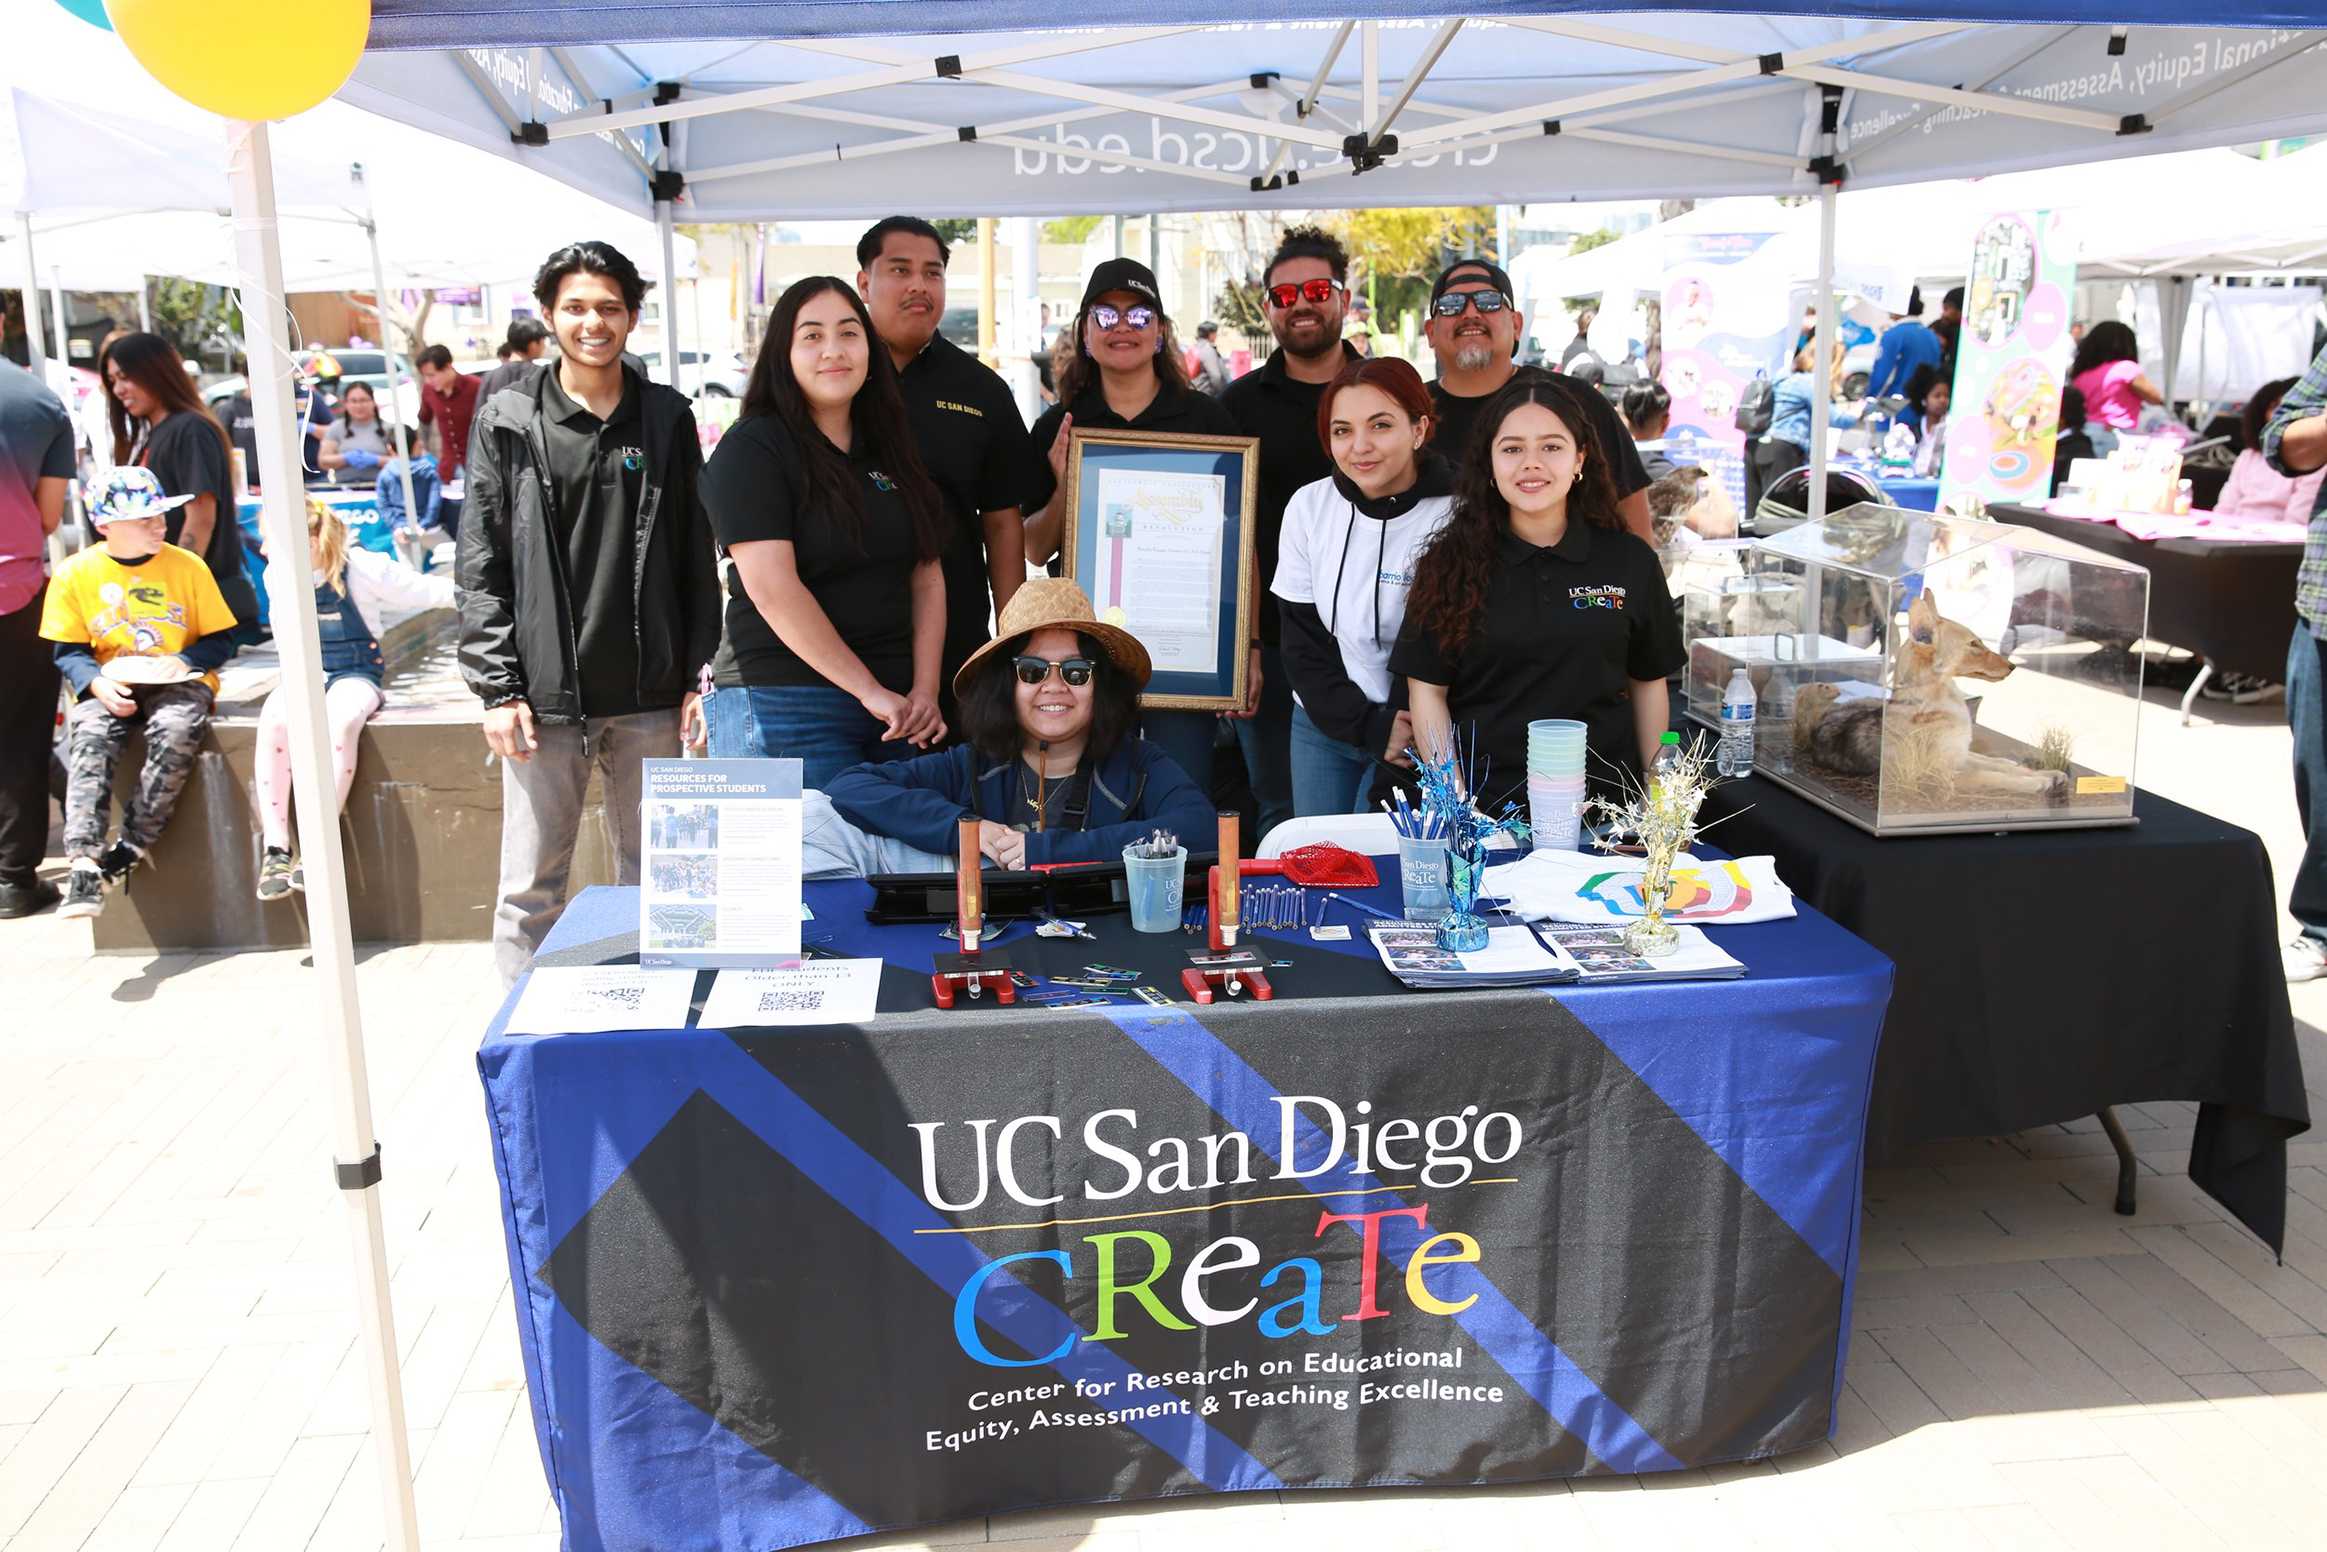 UCSD CREATE staff at the <a class="no-ext" href="http://www.barriologansae.com/" target="_blank" rel="noreferrer" />Barrio Logan Science & Art Expo</a> in San Diego, CA